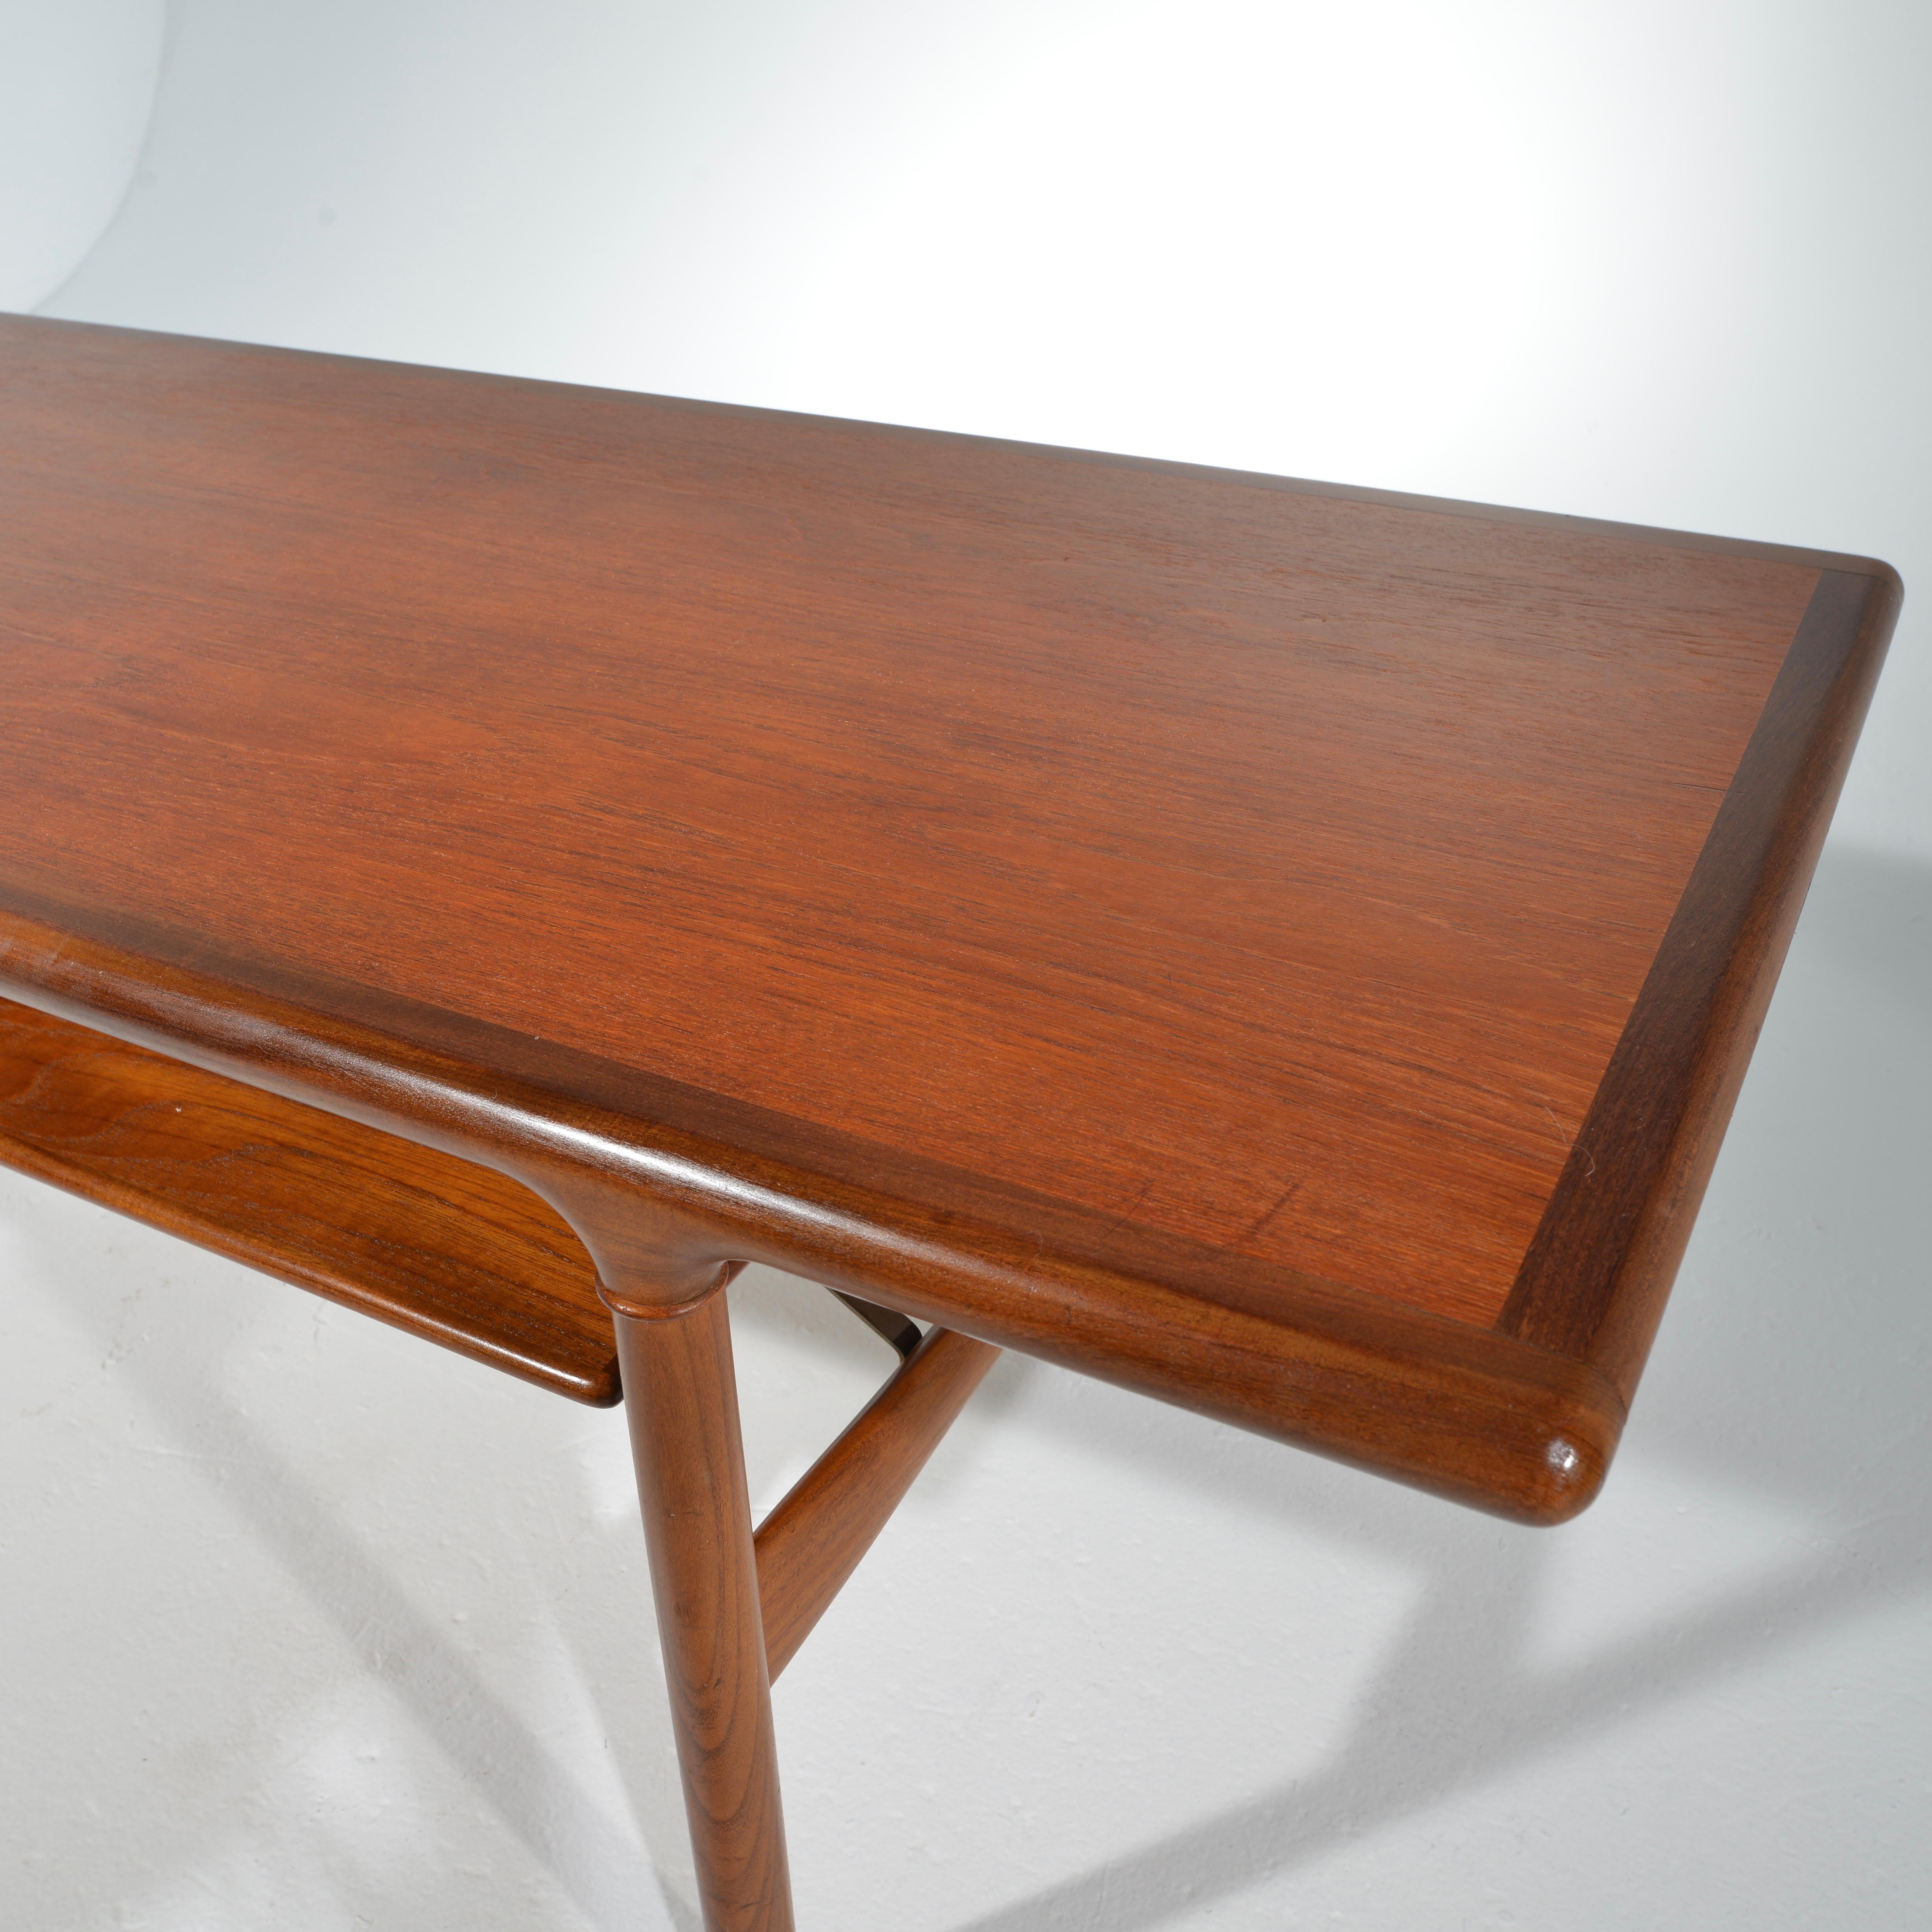 Scandinavian Modern Rare Large Midcentury Extending Teak Coffee Table with Floating Shelf For Sale